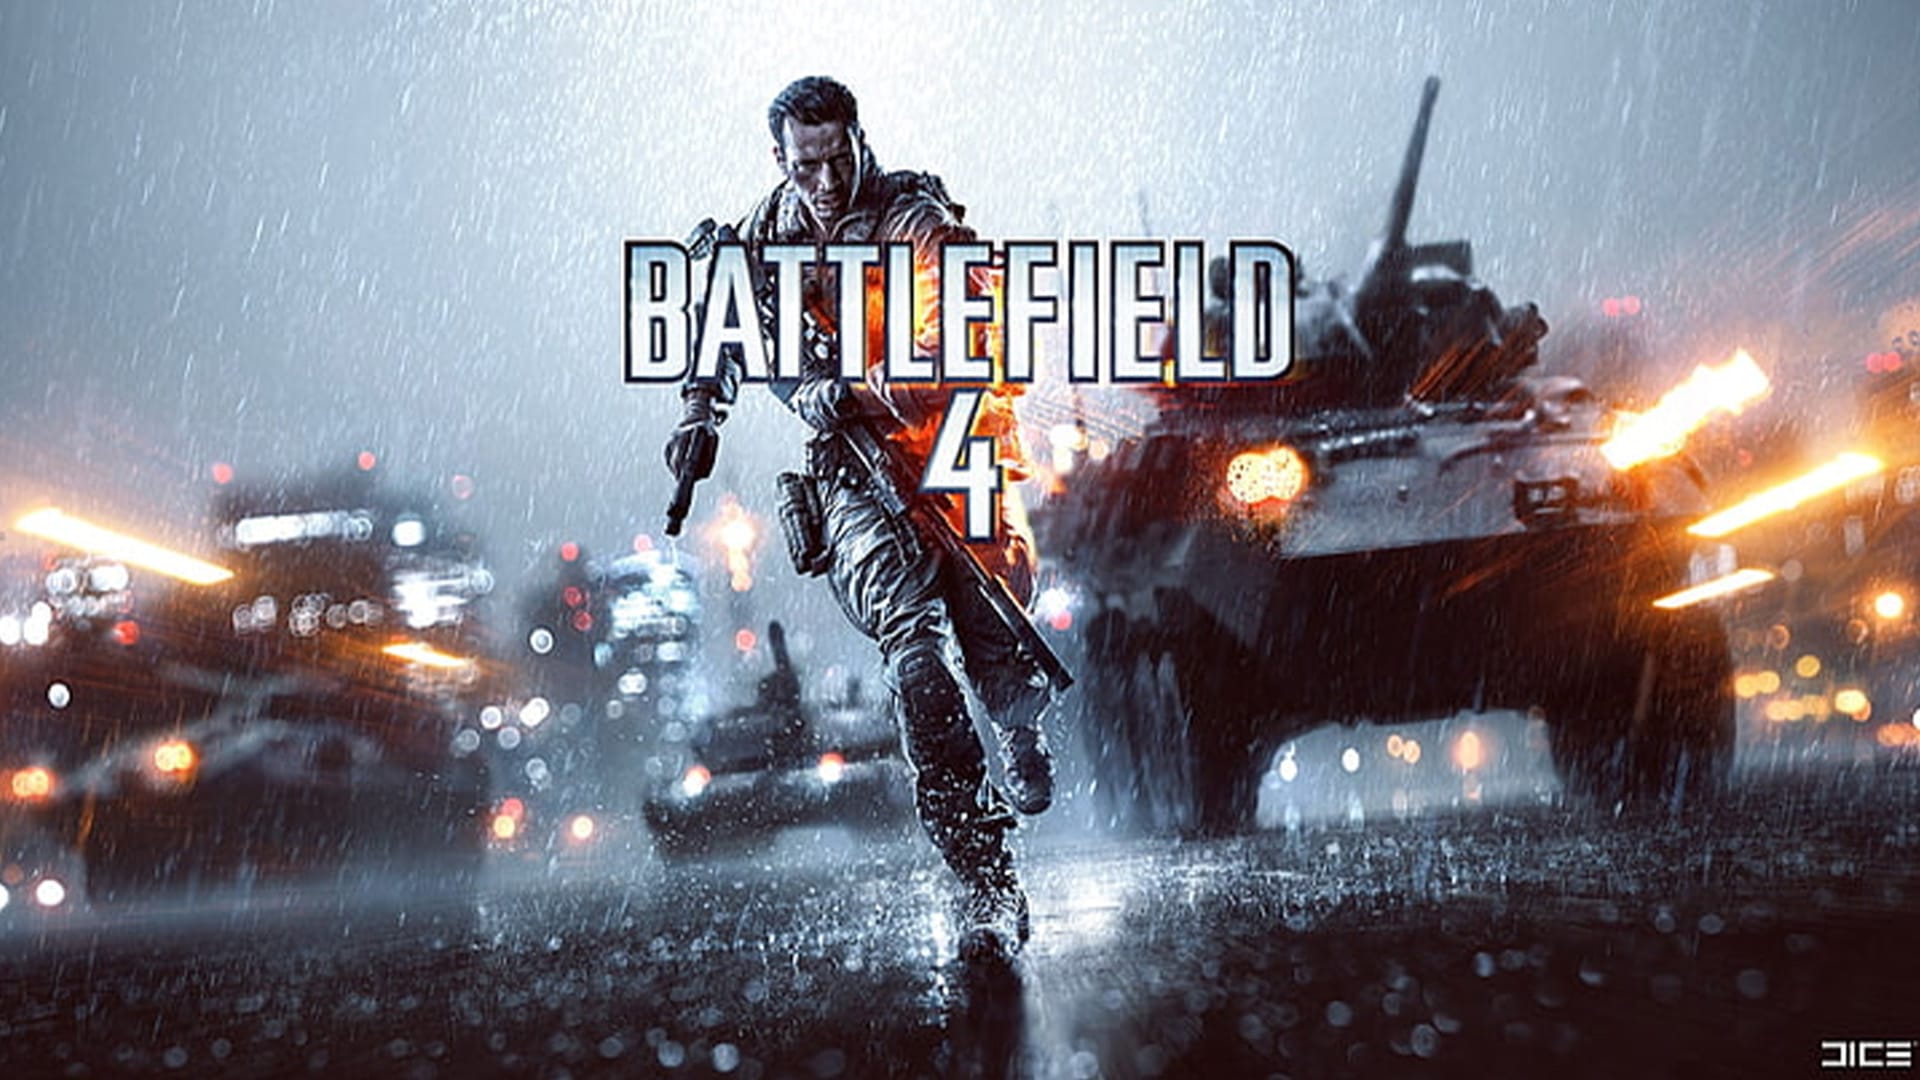 Battlefield 4 campaign plot & character renders revealed